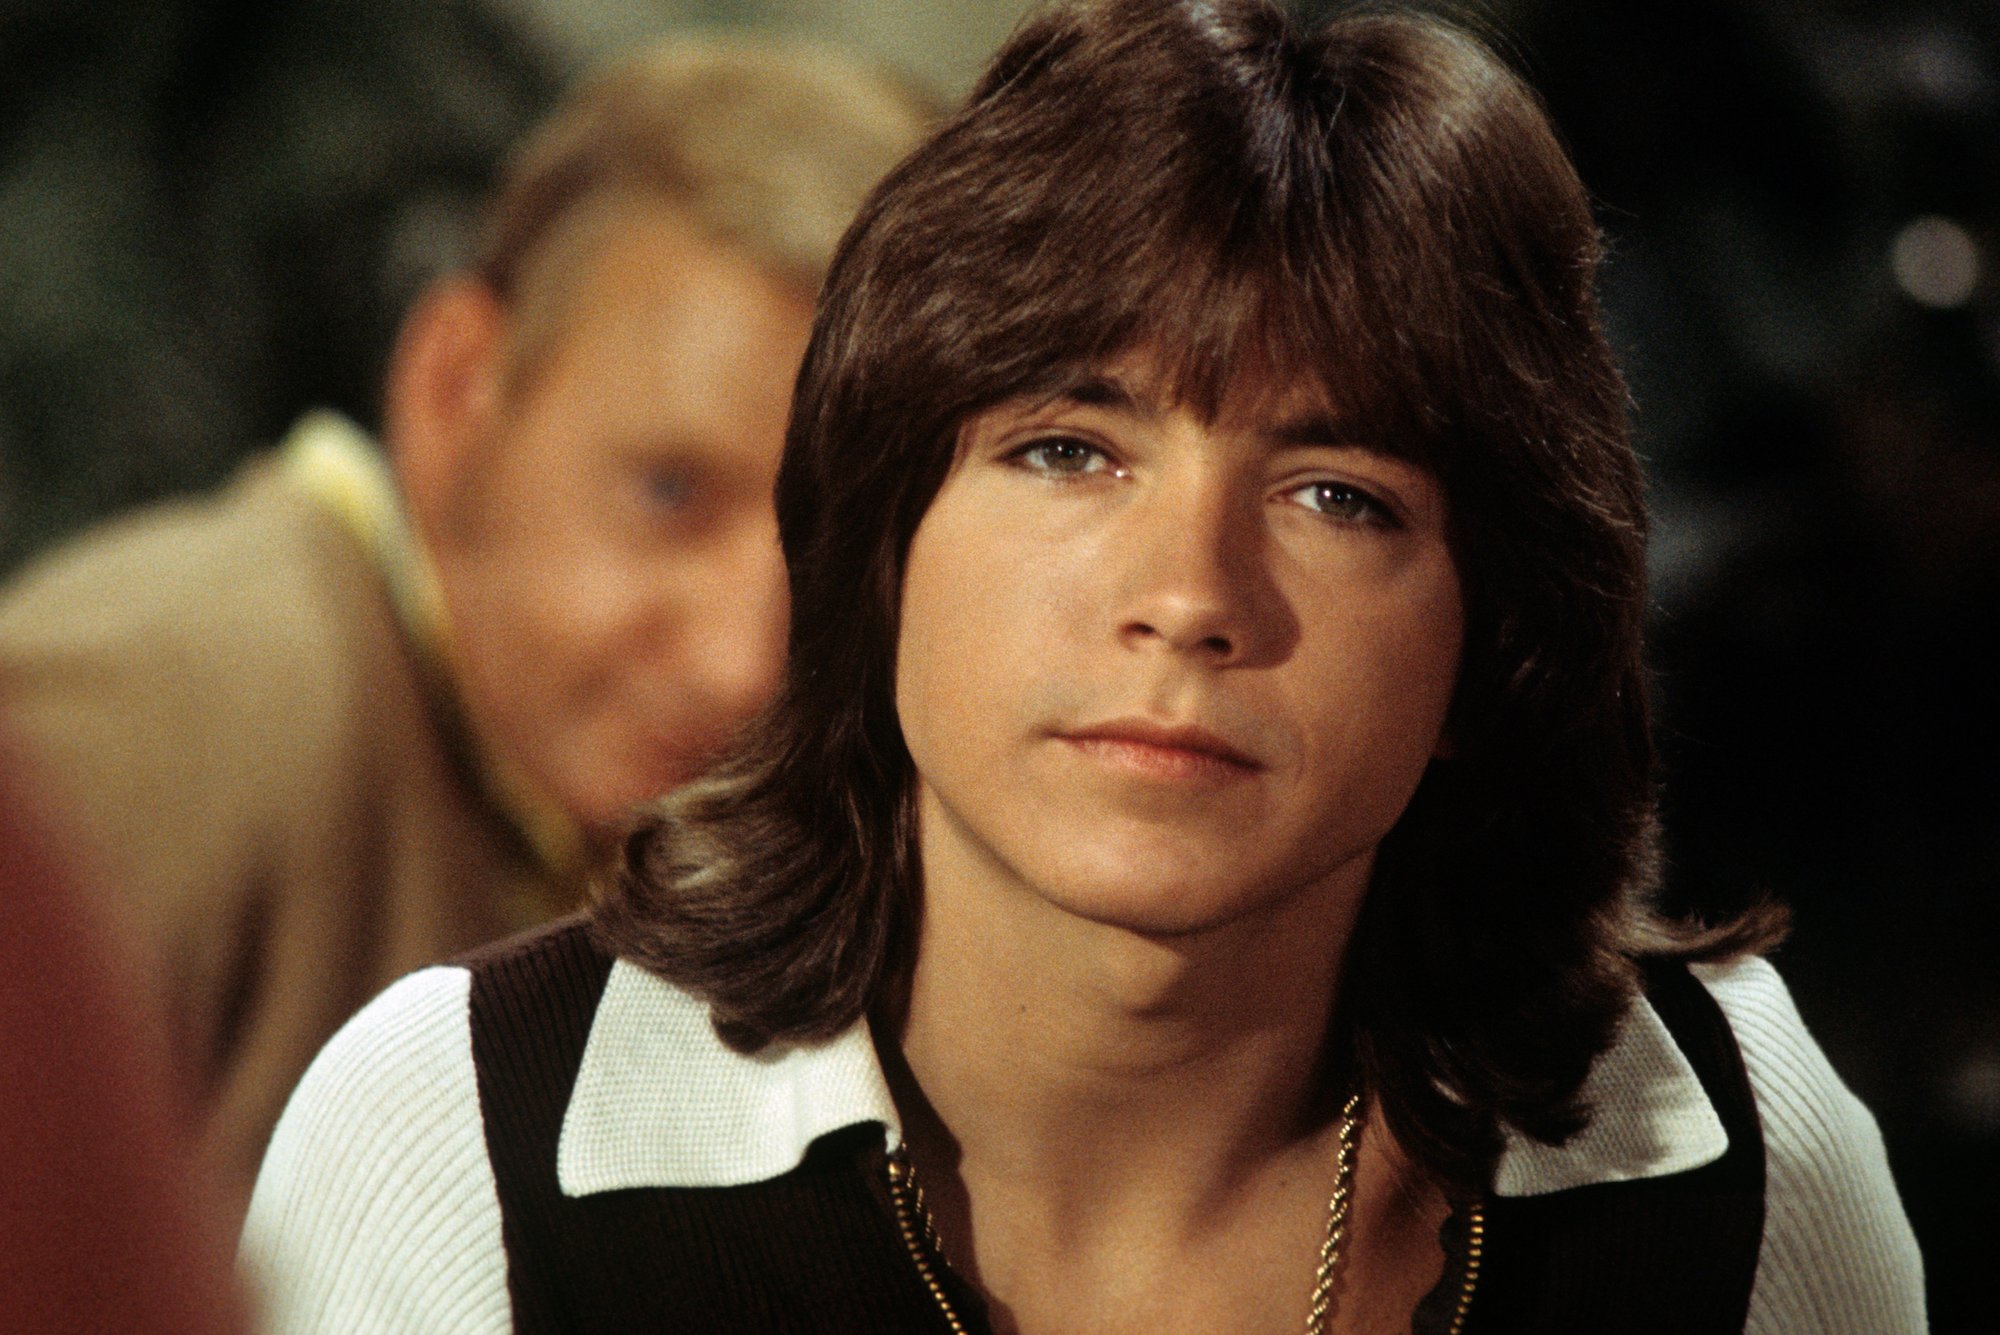 David Cassidy slightly smiling, in a photo from 1971